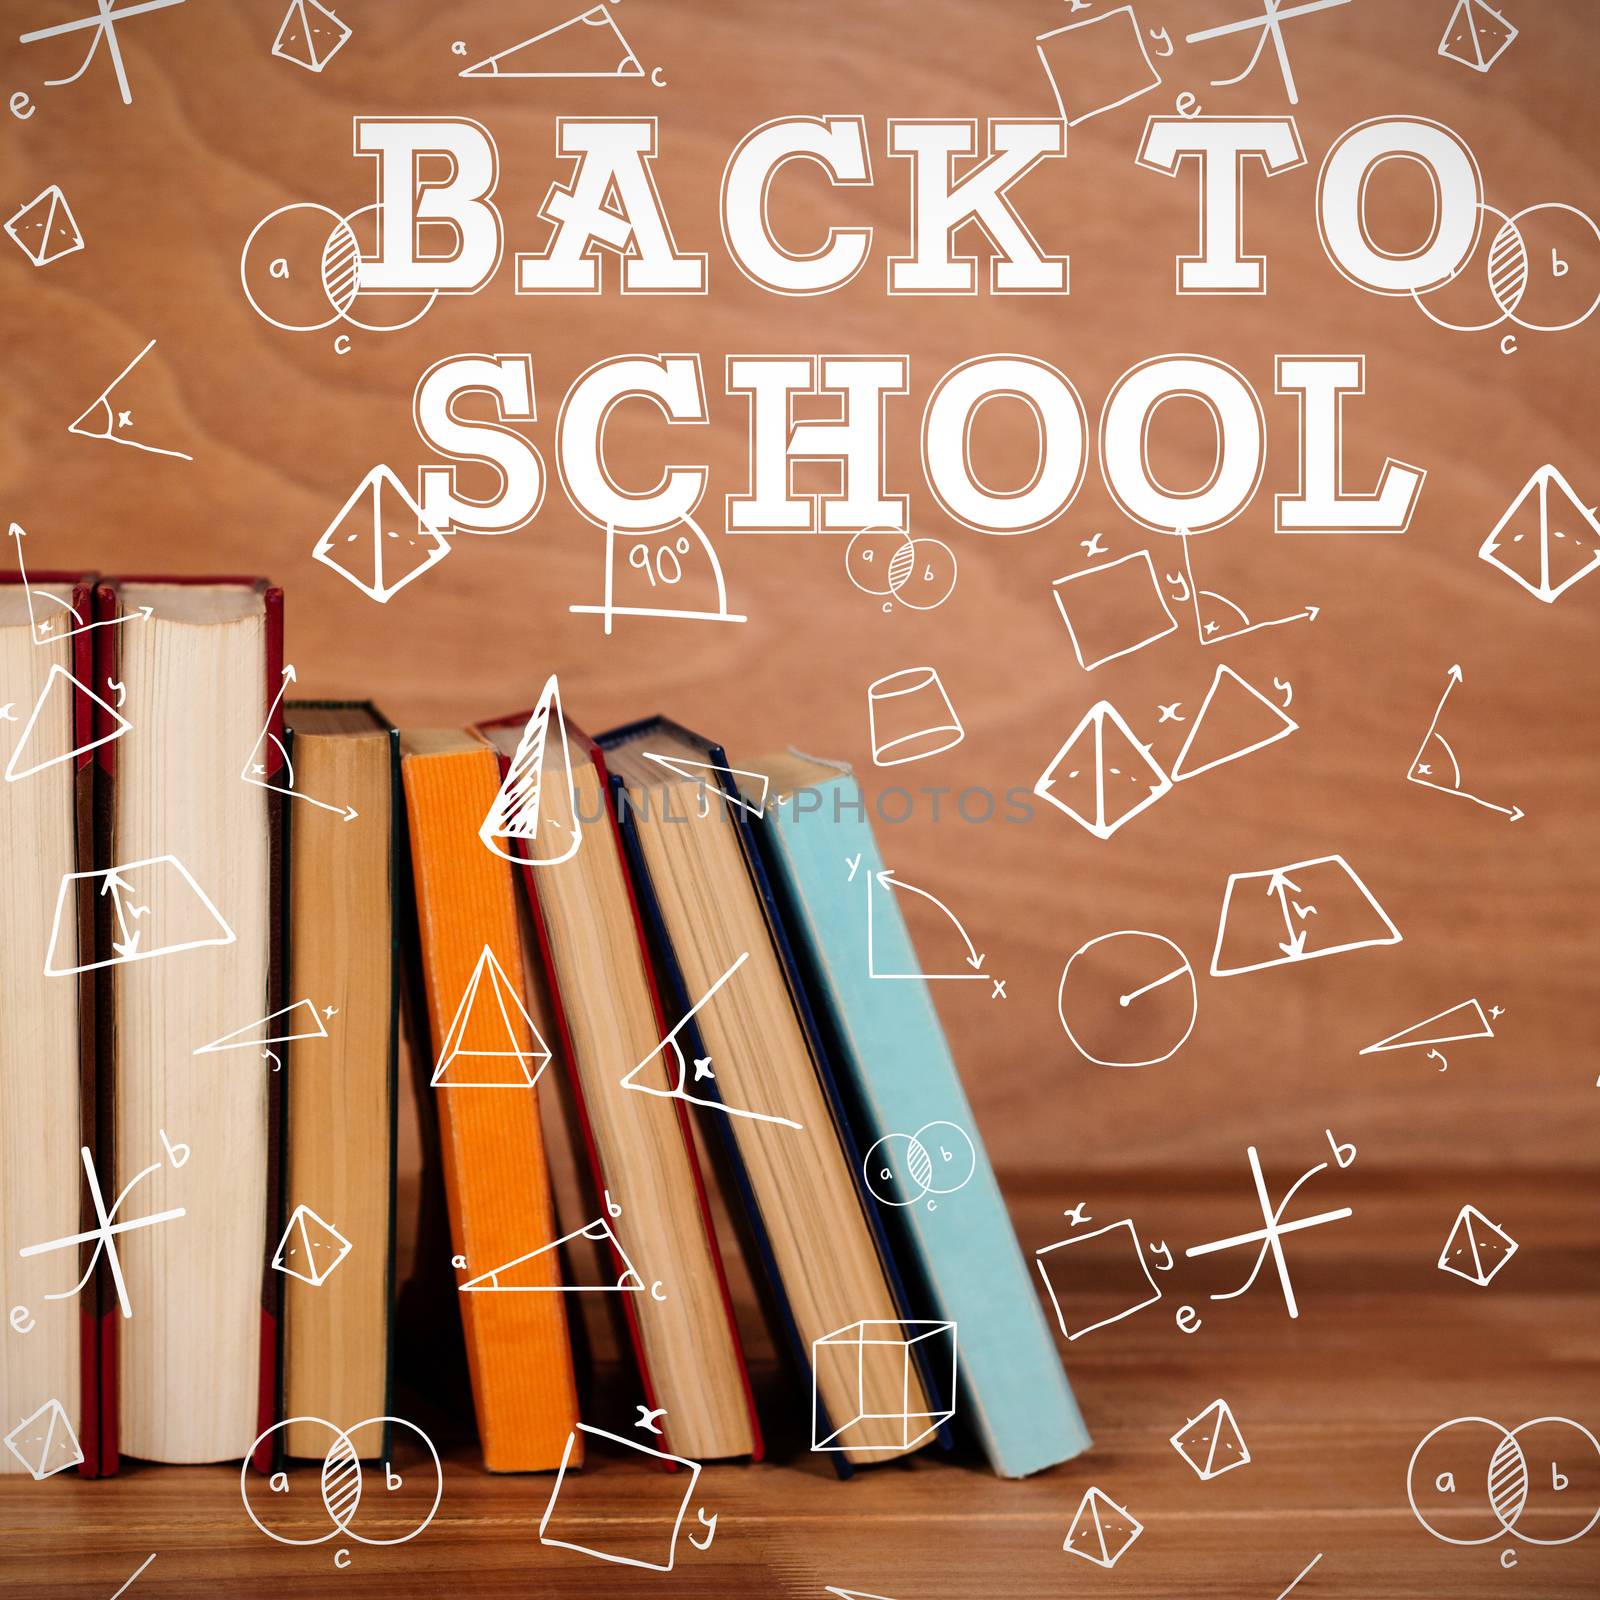 Back to school message against various book on wooden table